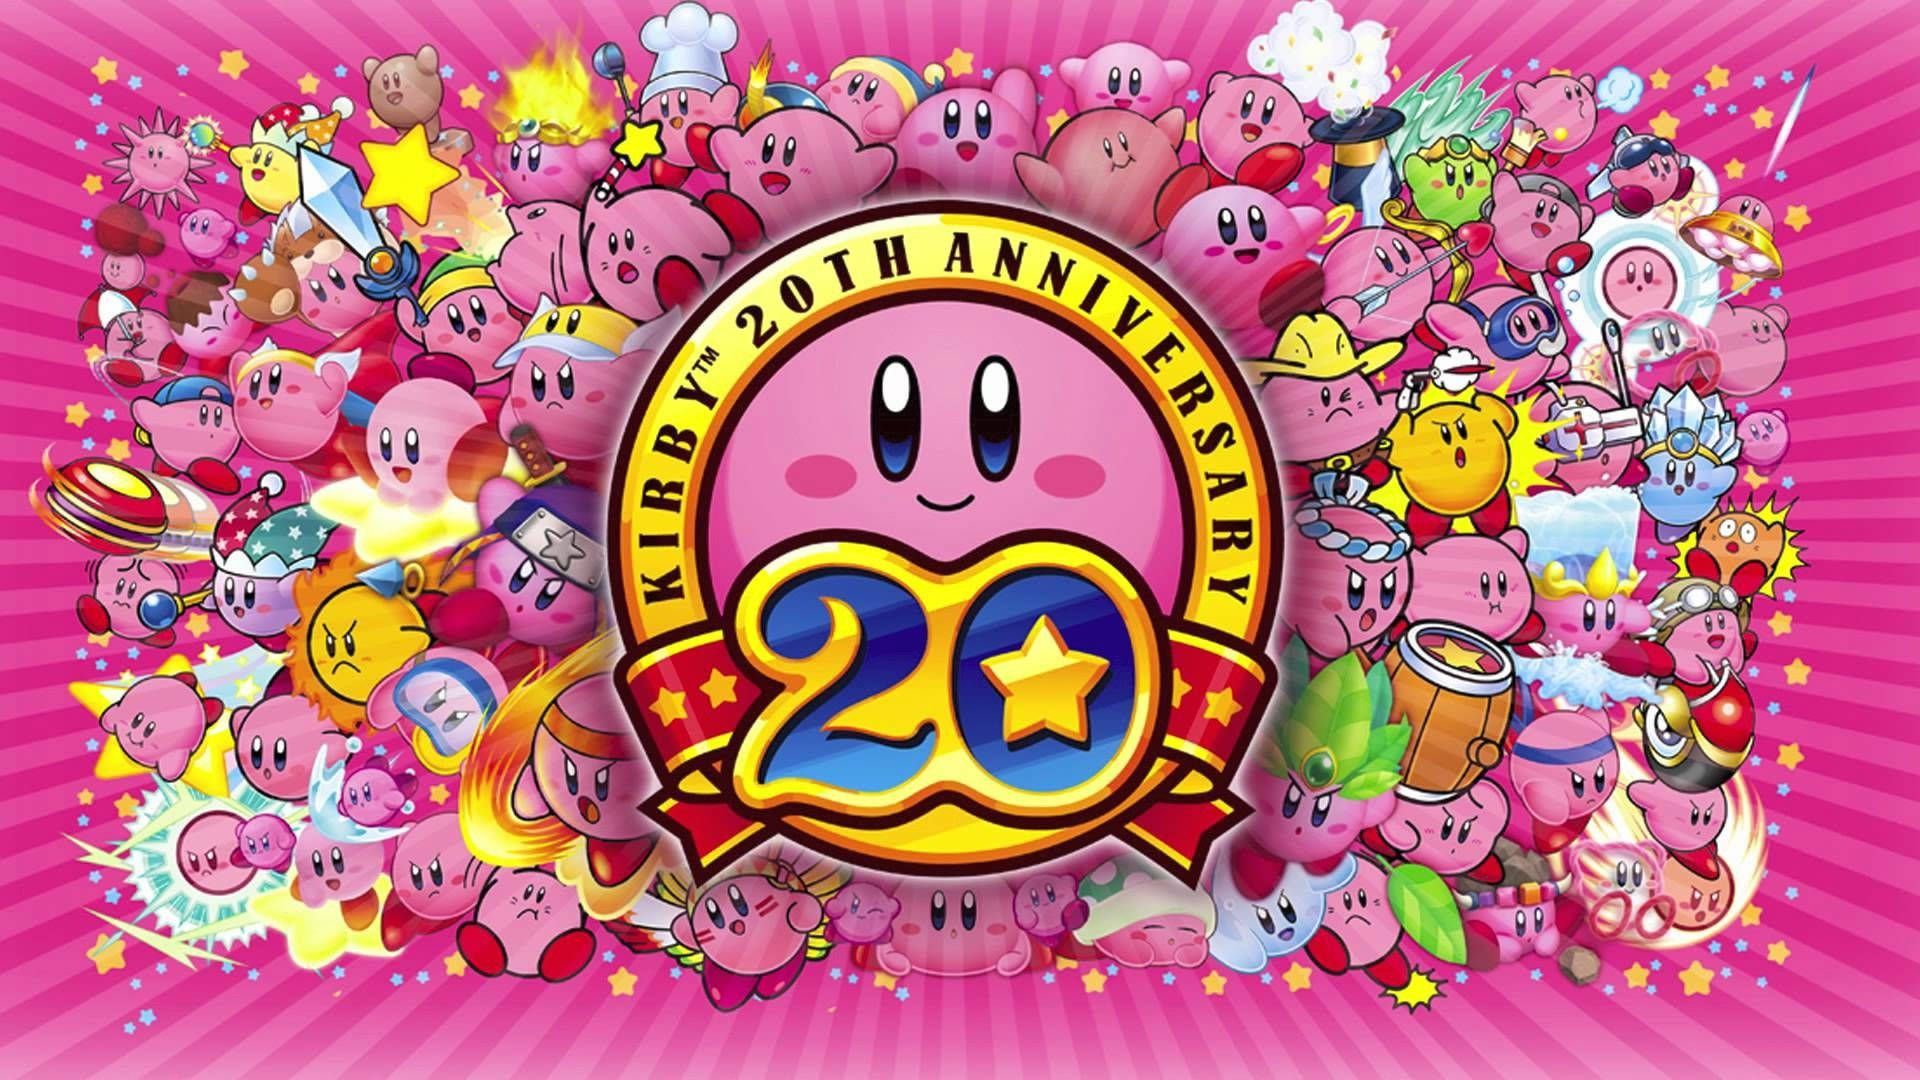 Hd Anniversary Cover Of Kirby Background